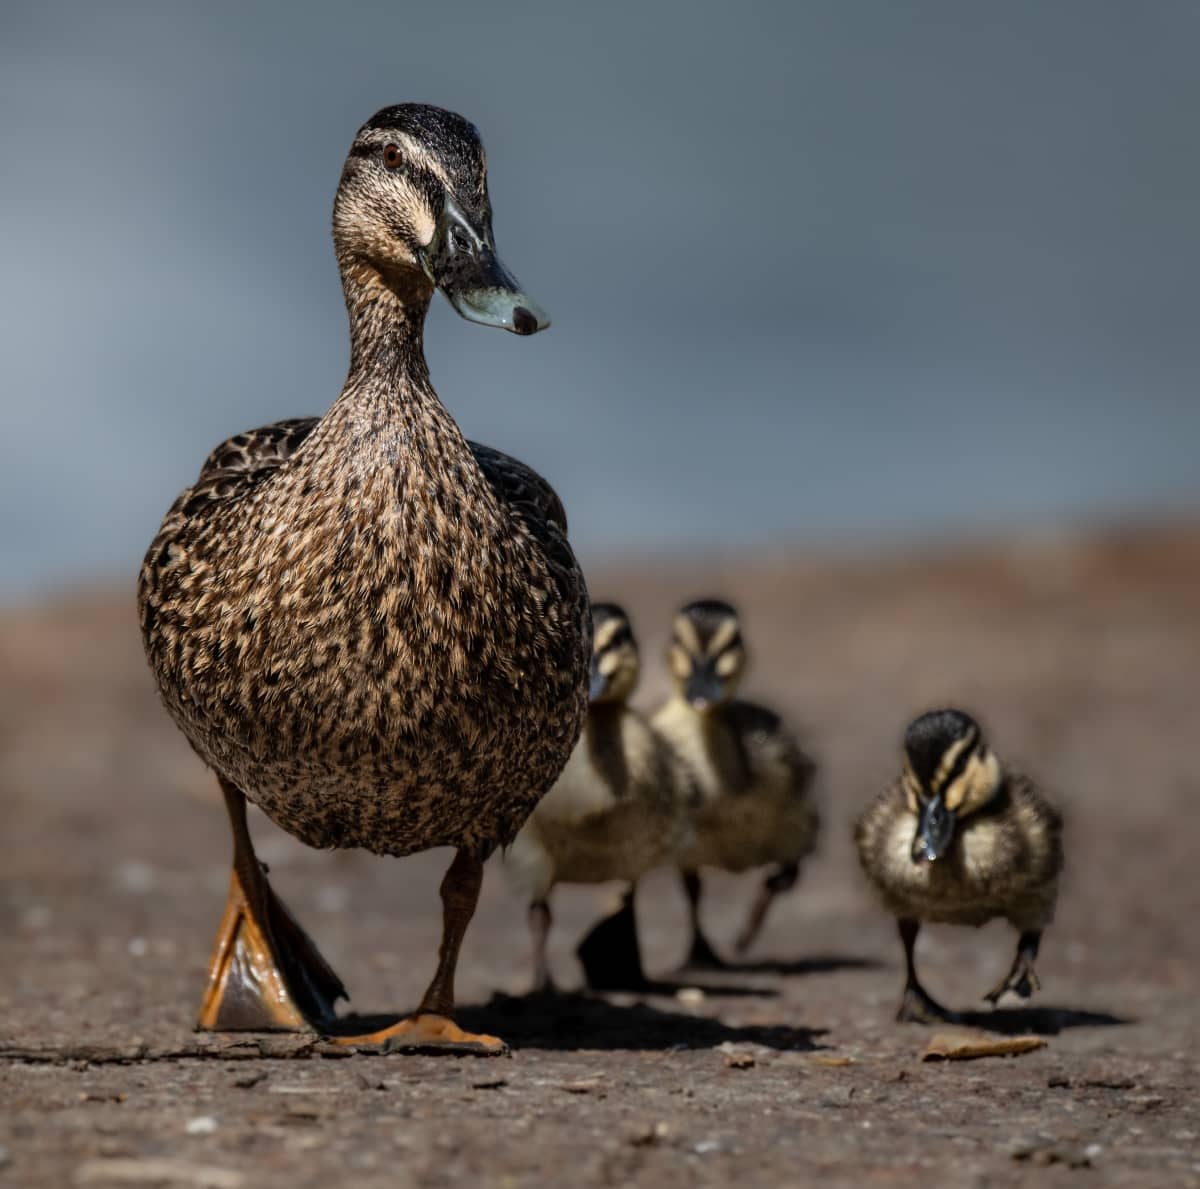 Duck and Ducklings